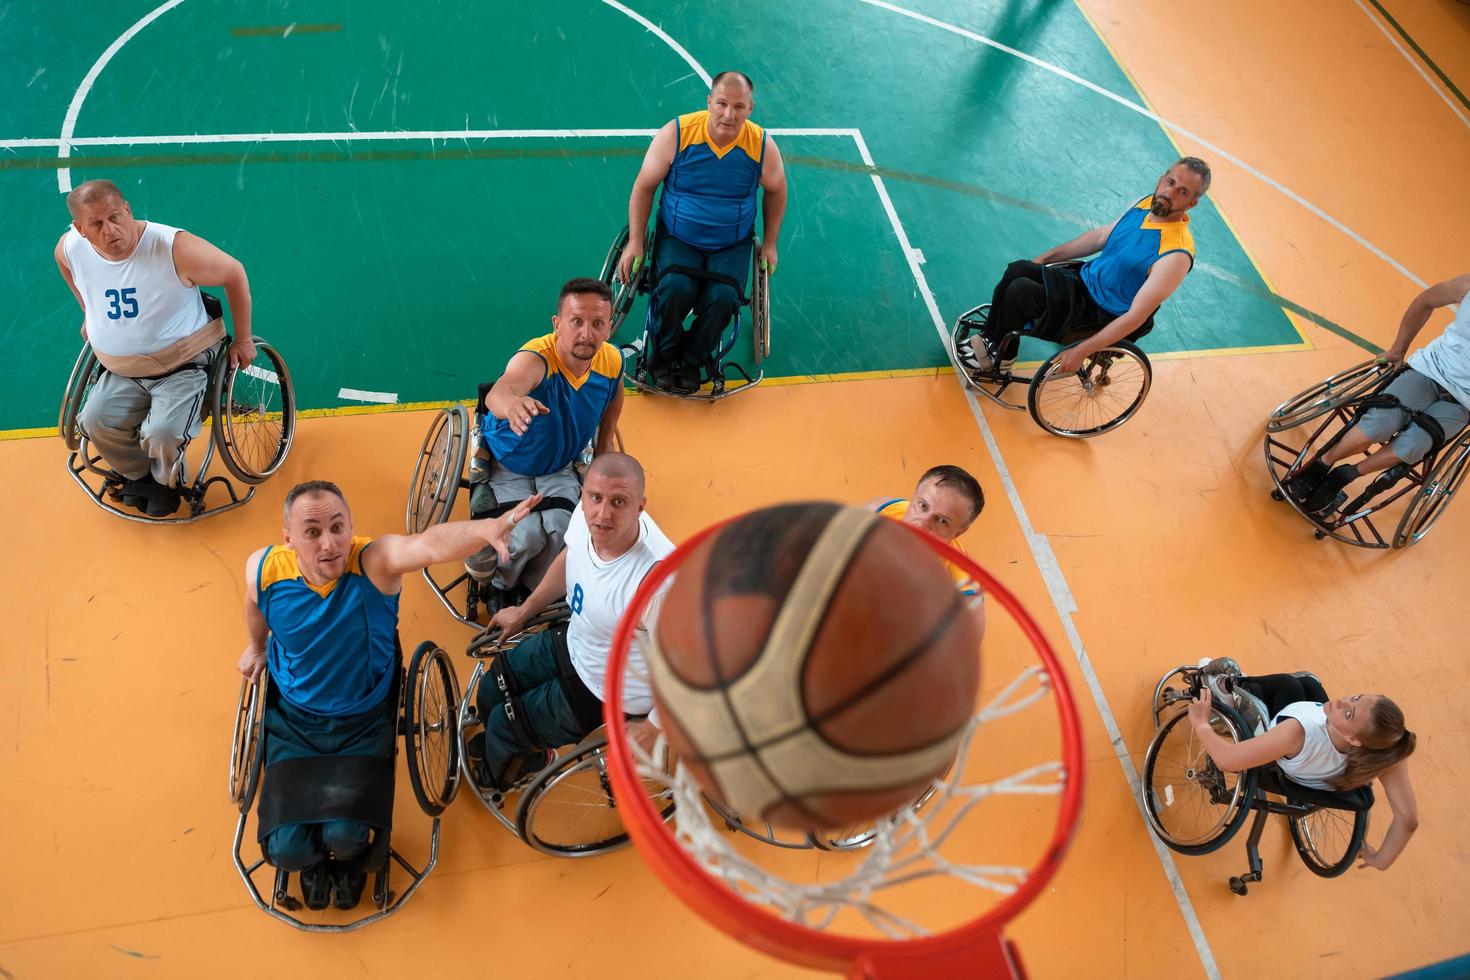 Disabled War or work veterans mixed race and age basketball teams in wheelchairs playing a training match in a sports gym hall. Handicapped people rehabilitation and inclusion concept. photo